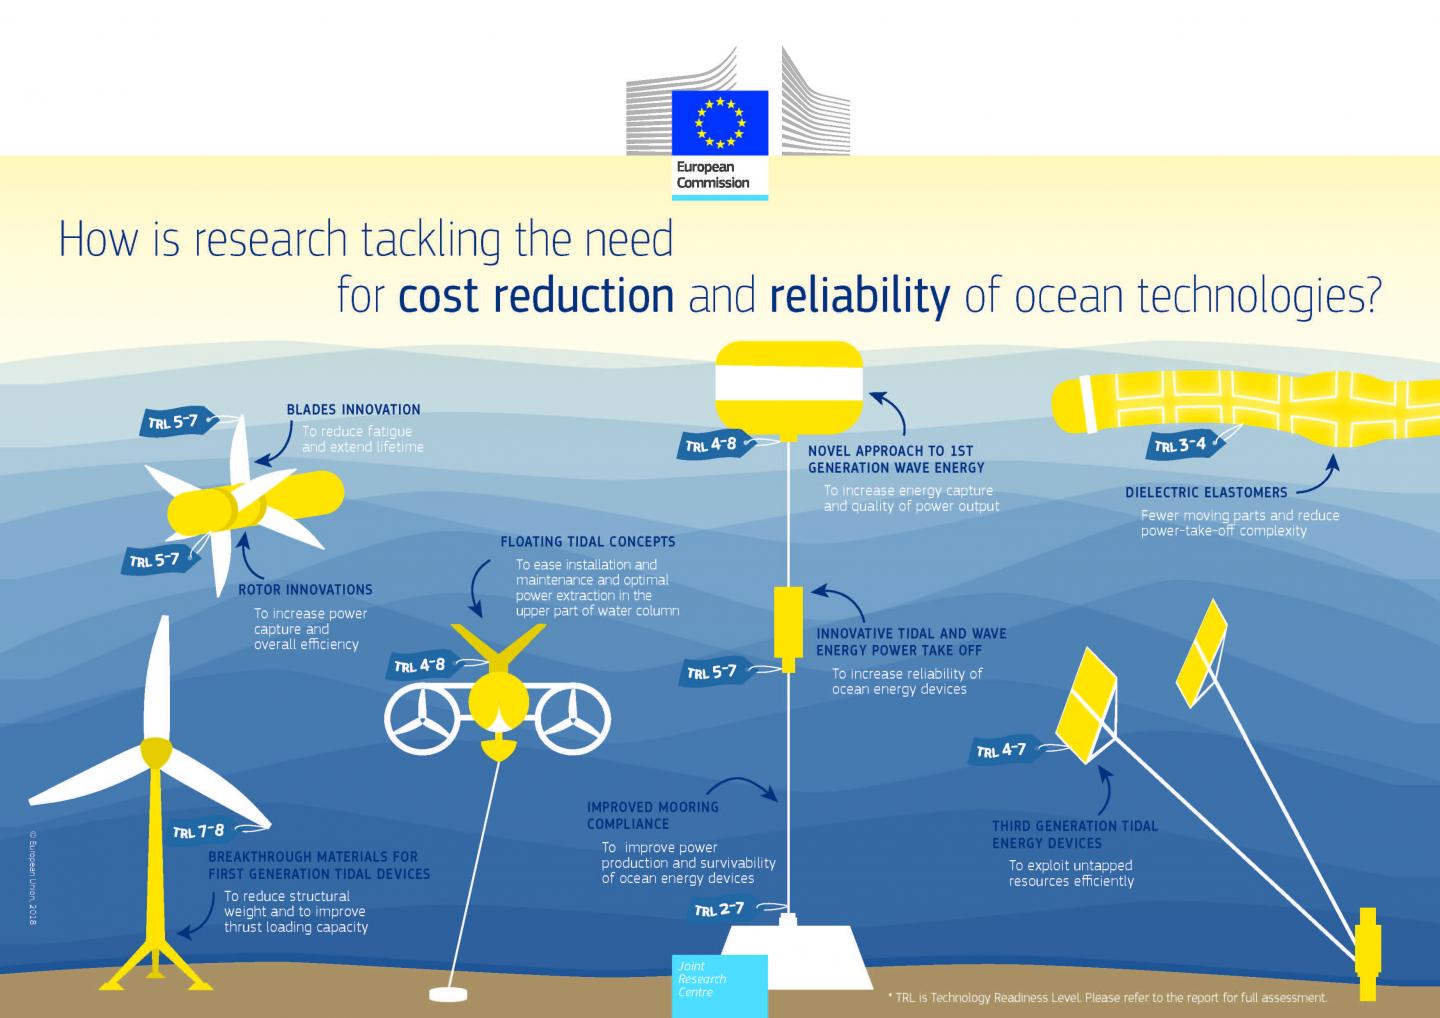 How Research is Tackling the Need for Cost Reduction and Reliability of Ocean Technologies